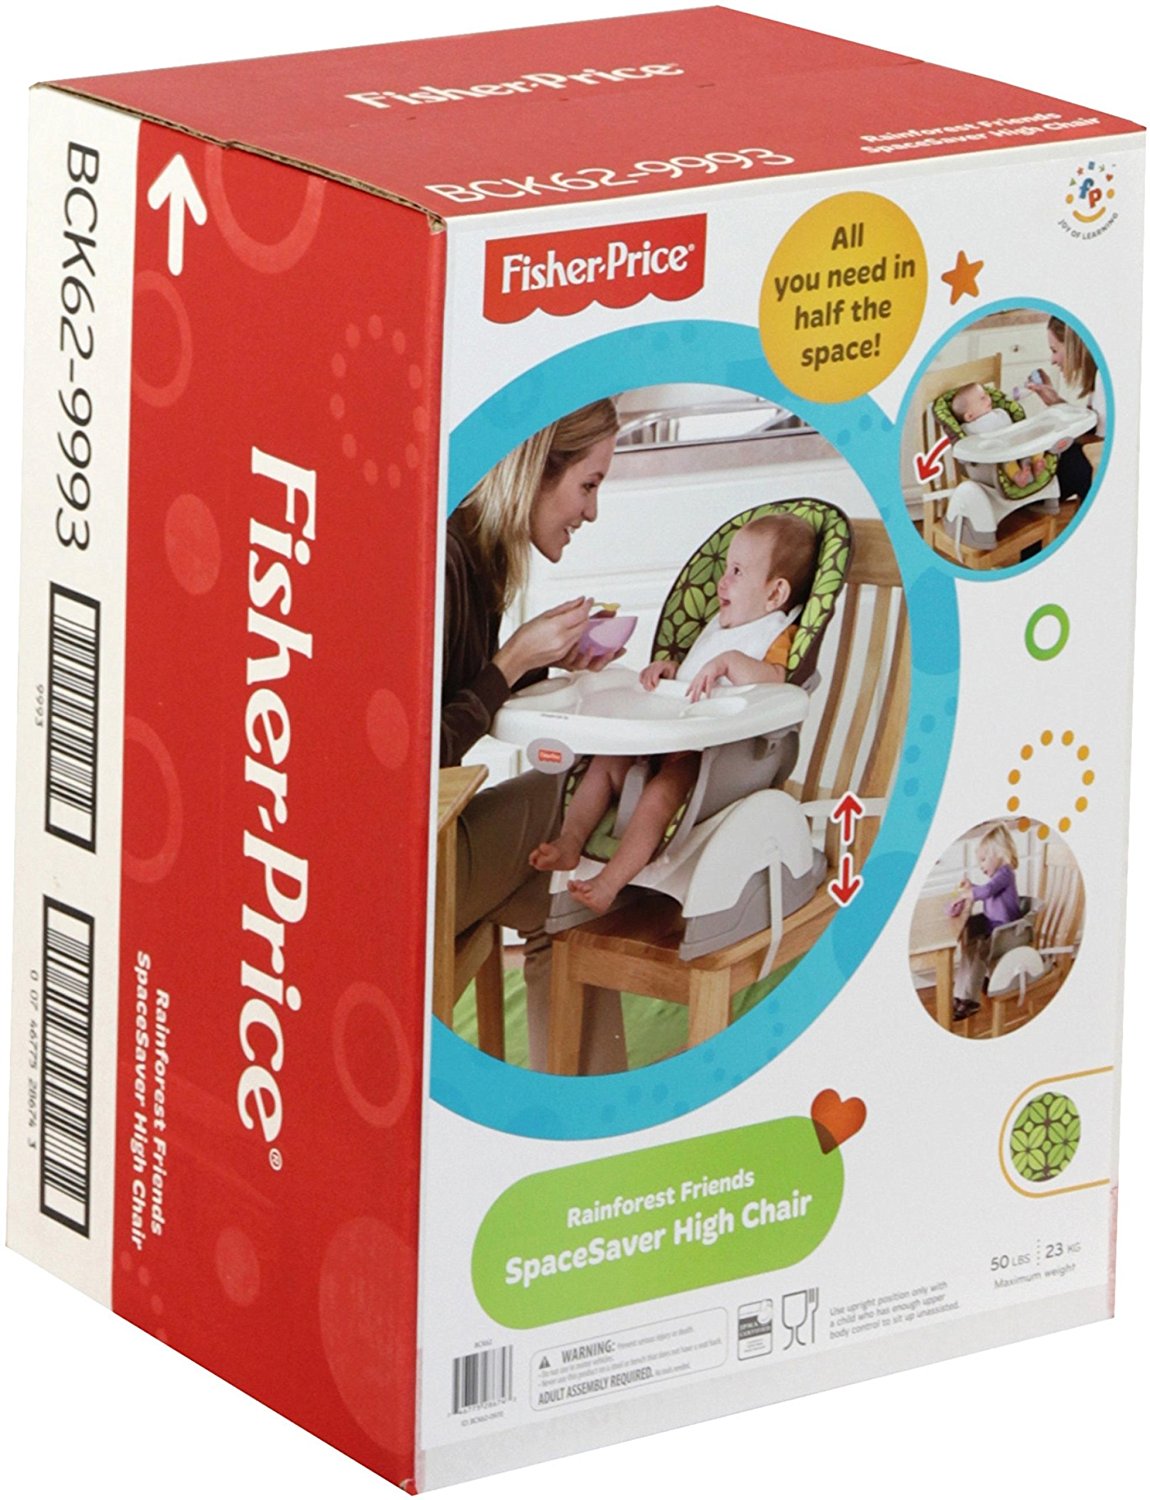 Fisher Price Spacesaver High Chair Rainforest Friends Bck62 You